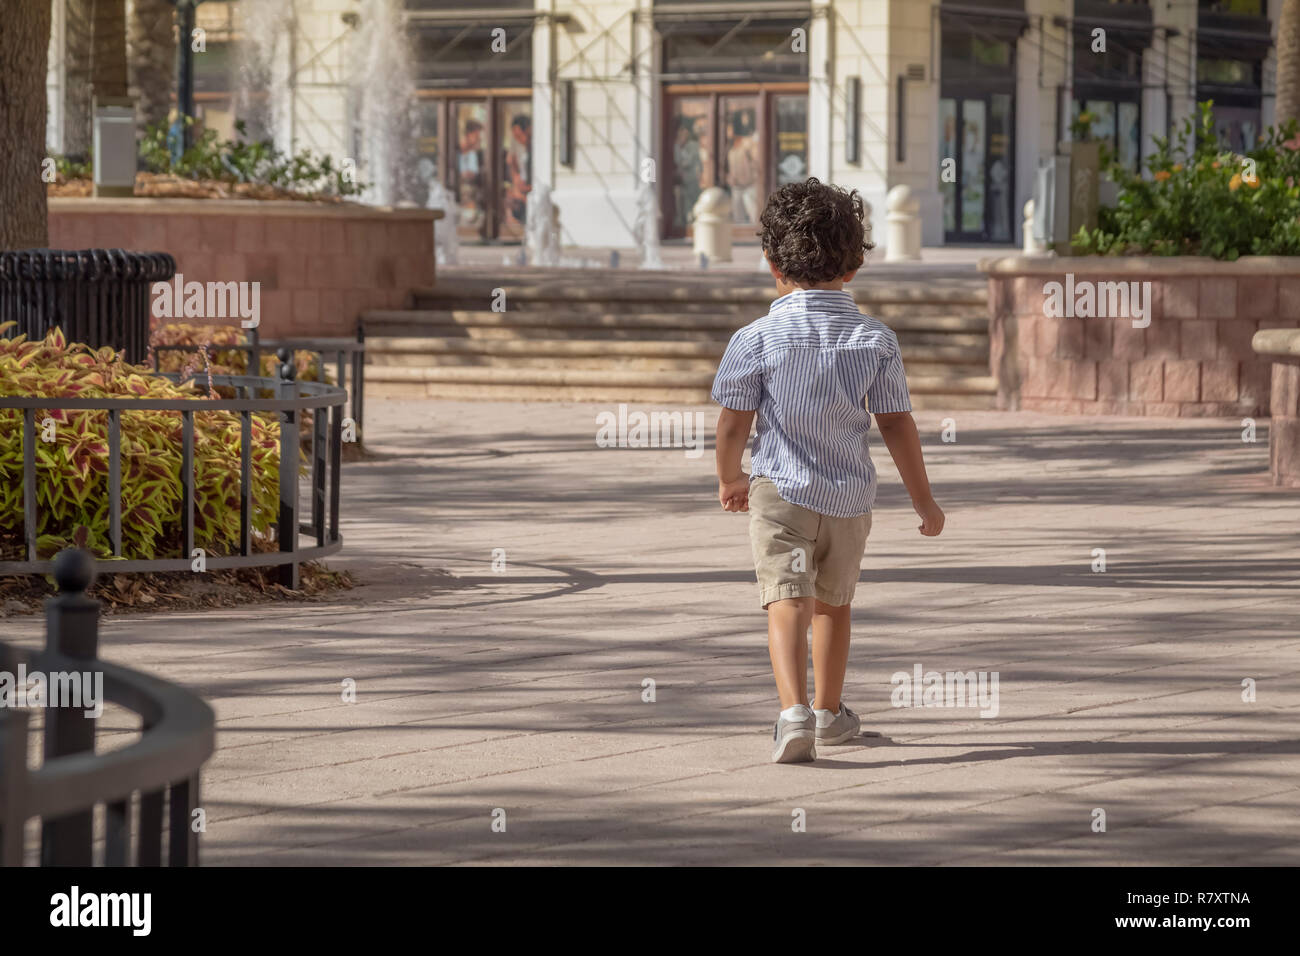 A confident little boy walks away across the courtyard on a sunny summer day. Dressed in tennis shoes, khaki shorts, and a blue striped shirt. Stock Photo